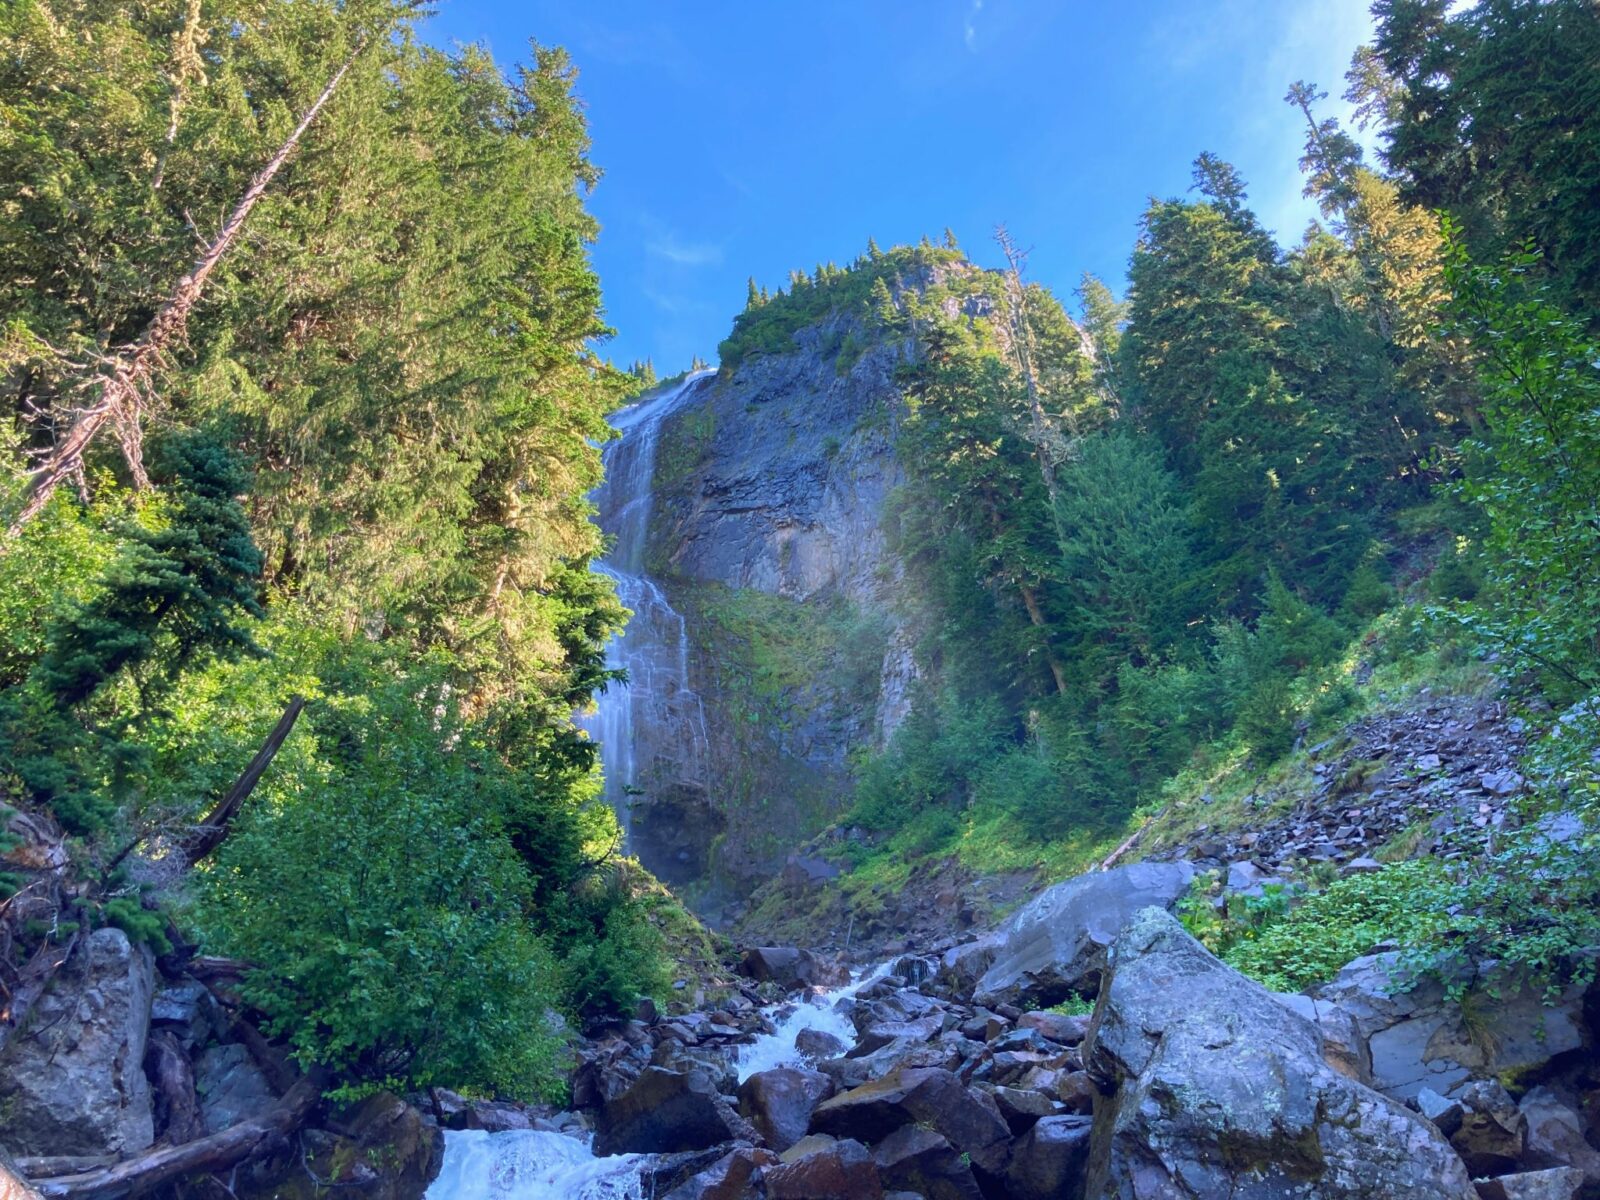 A waterfall comes down a vertical rock face into a creek in the forest on a sunny day